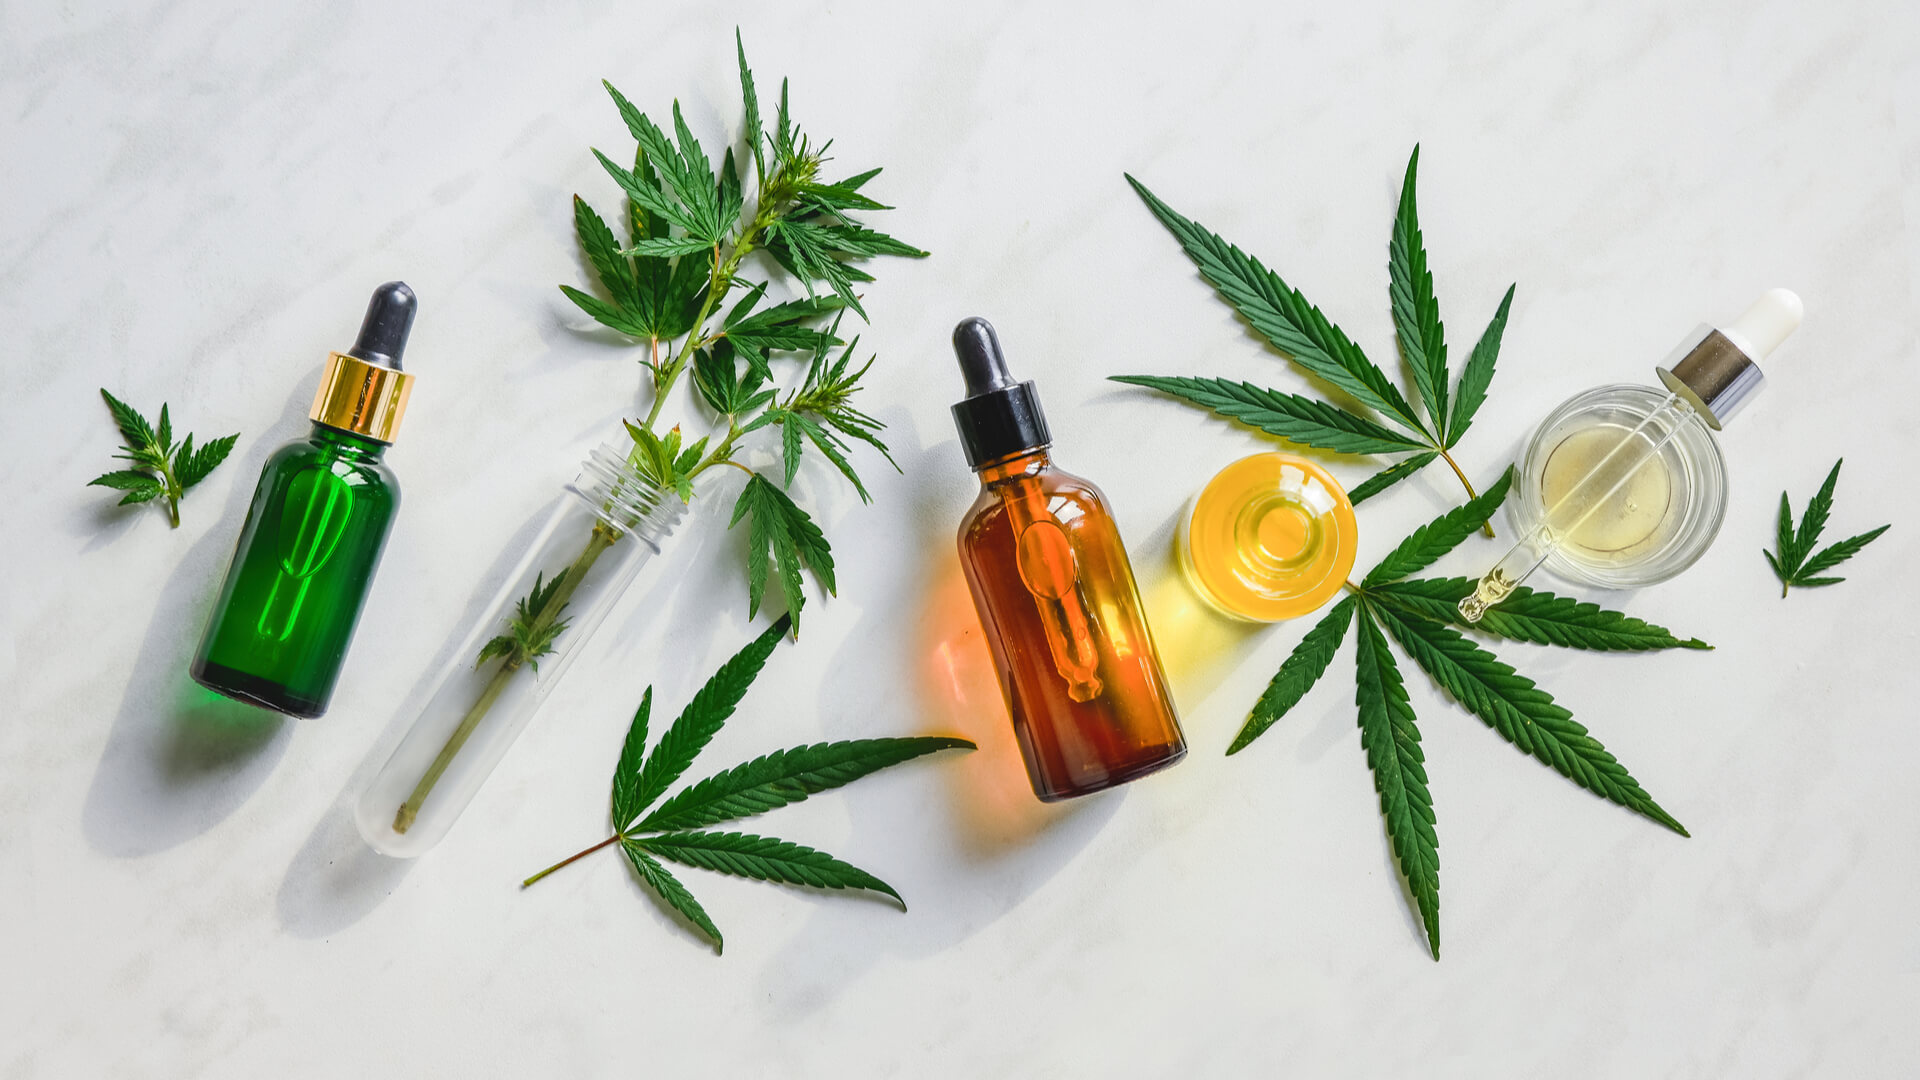 Bottles of Hemp and CBD oil next to cannabis leaves on a white background